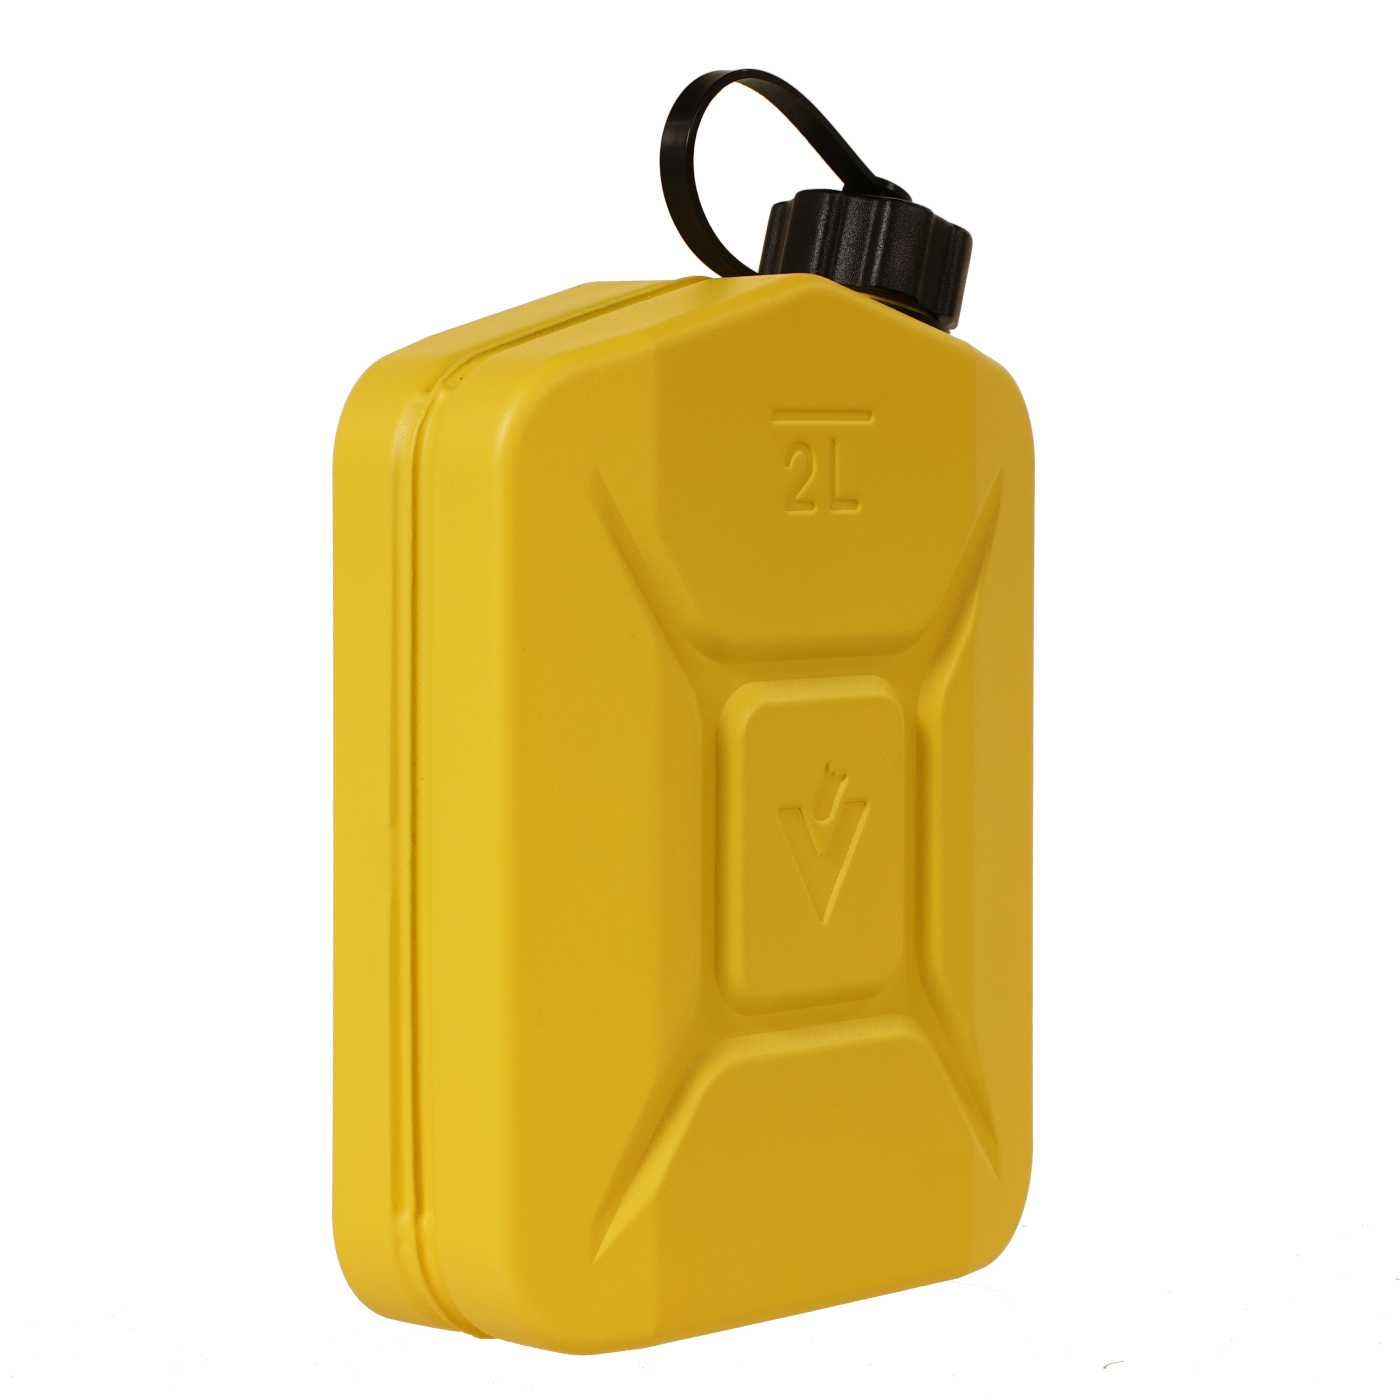 Metal fuel can Touratech "Voyager" 2 L